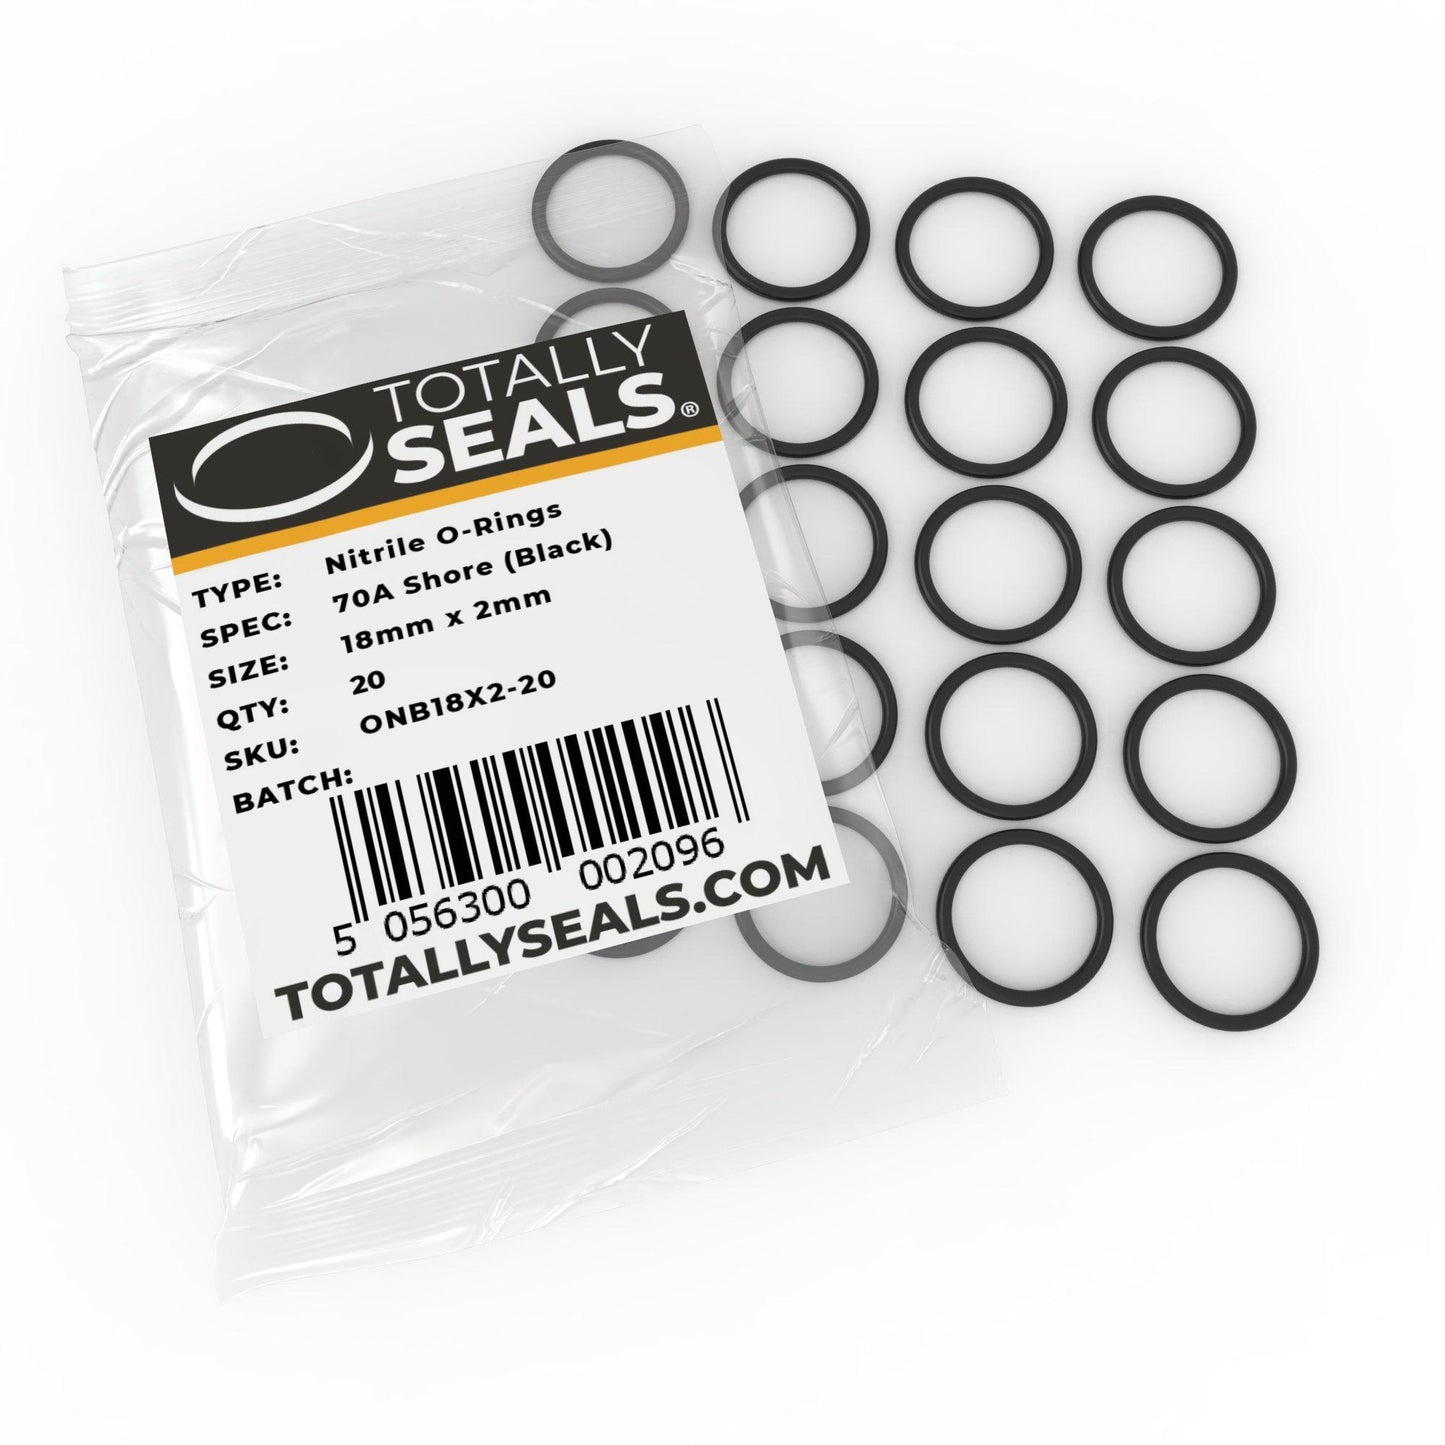 18mm x 2mm (22mm OD) Nitrile O-Rings - Totally Seals®